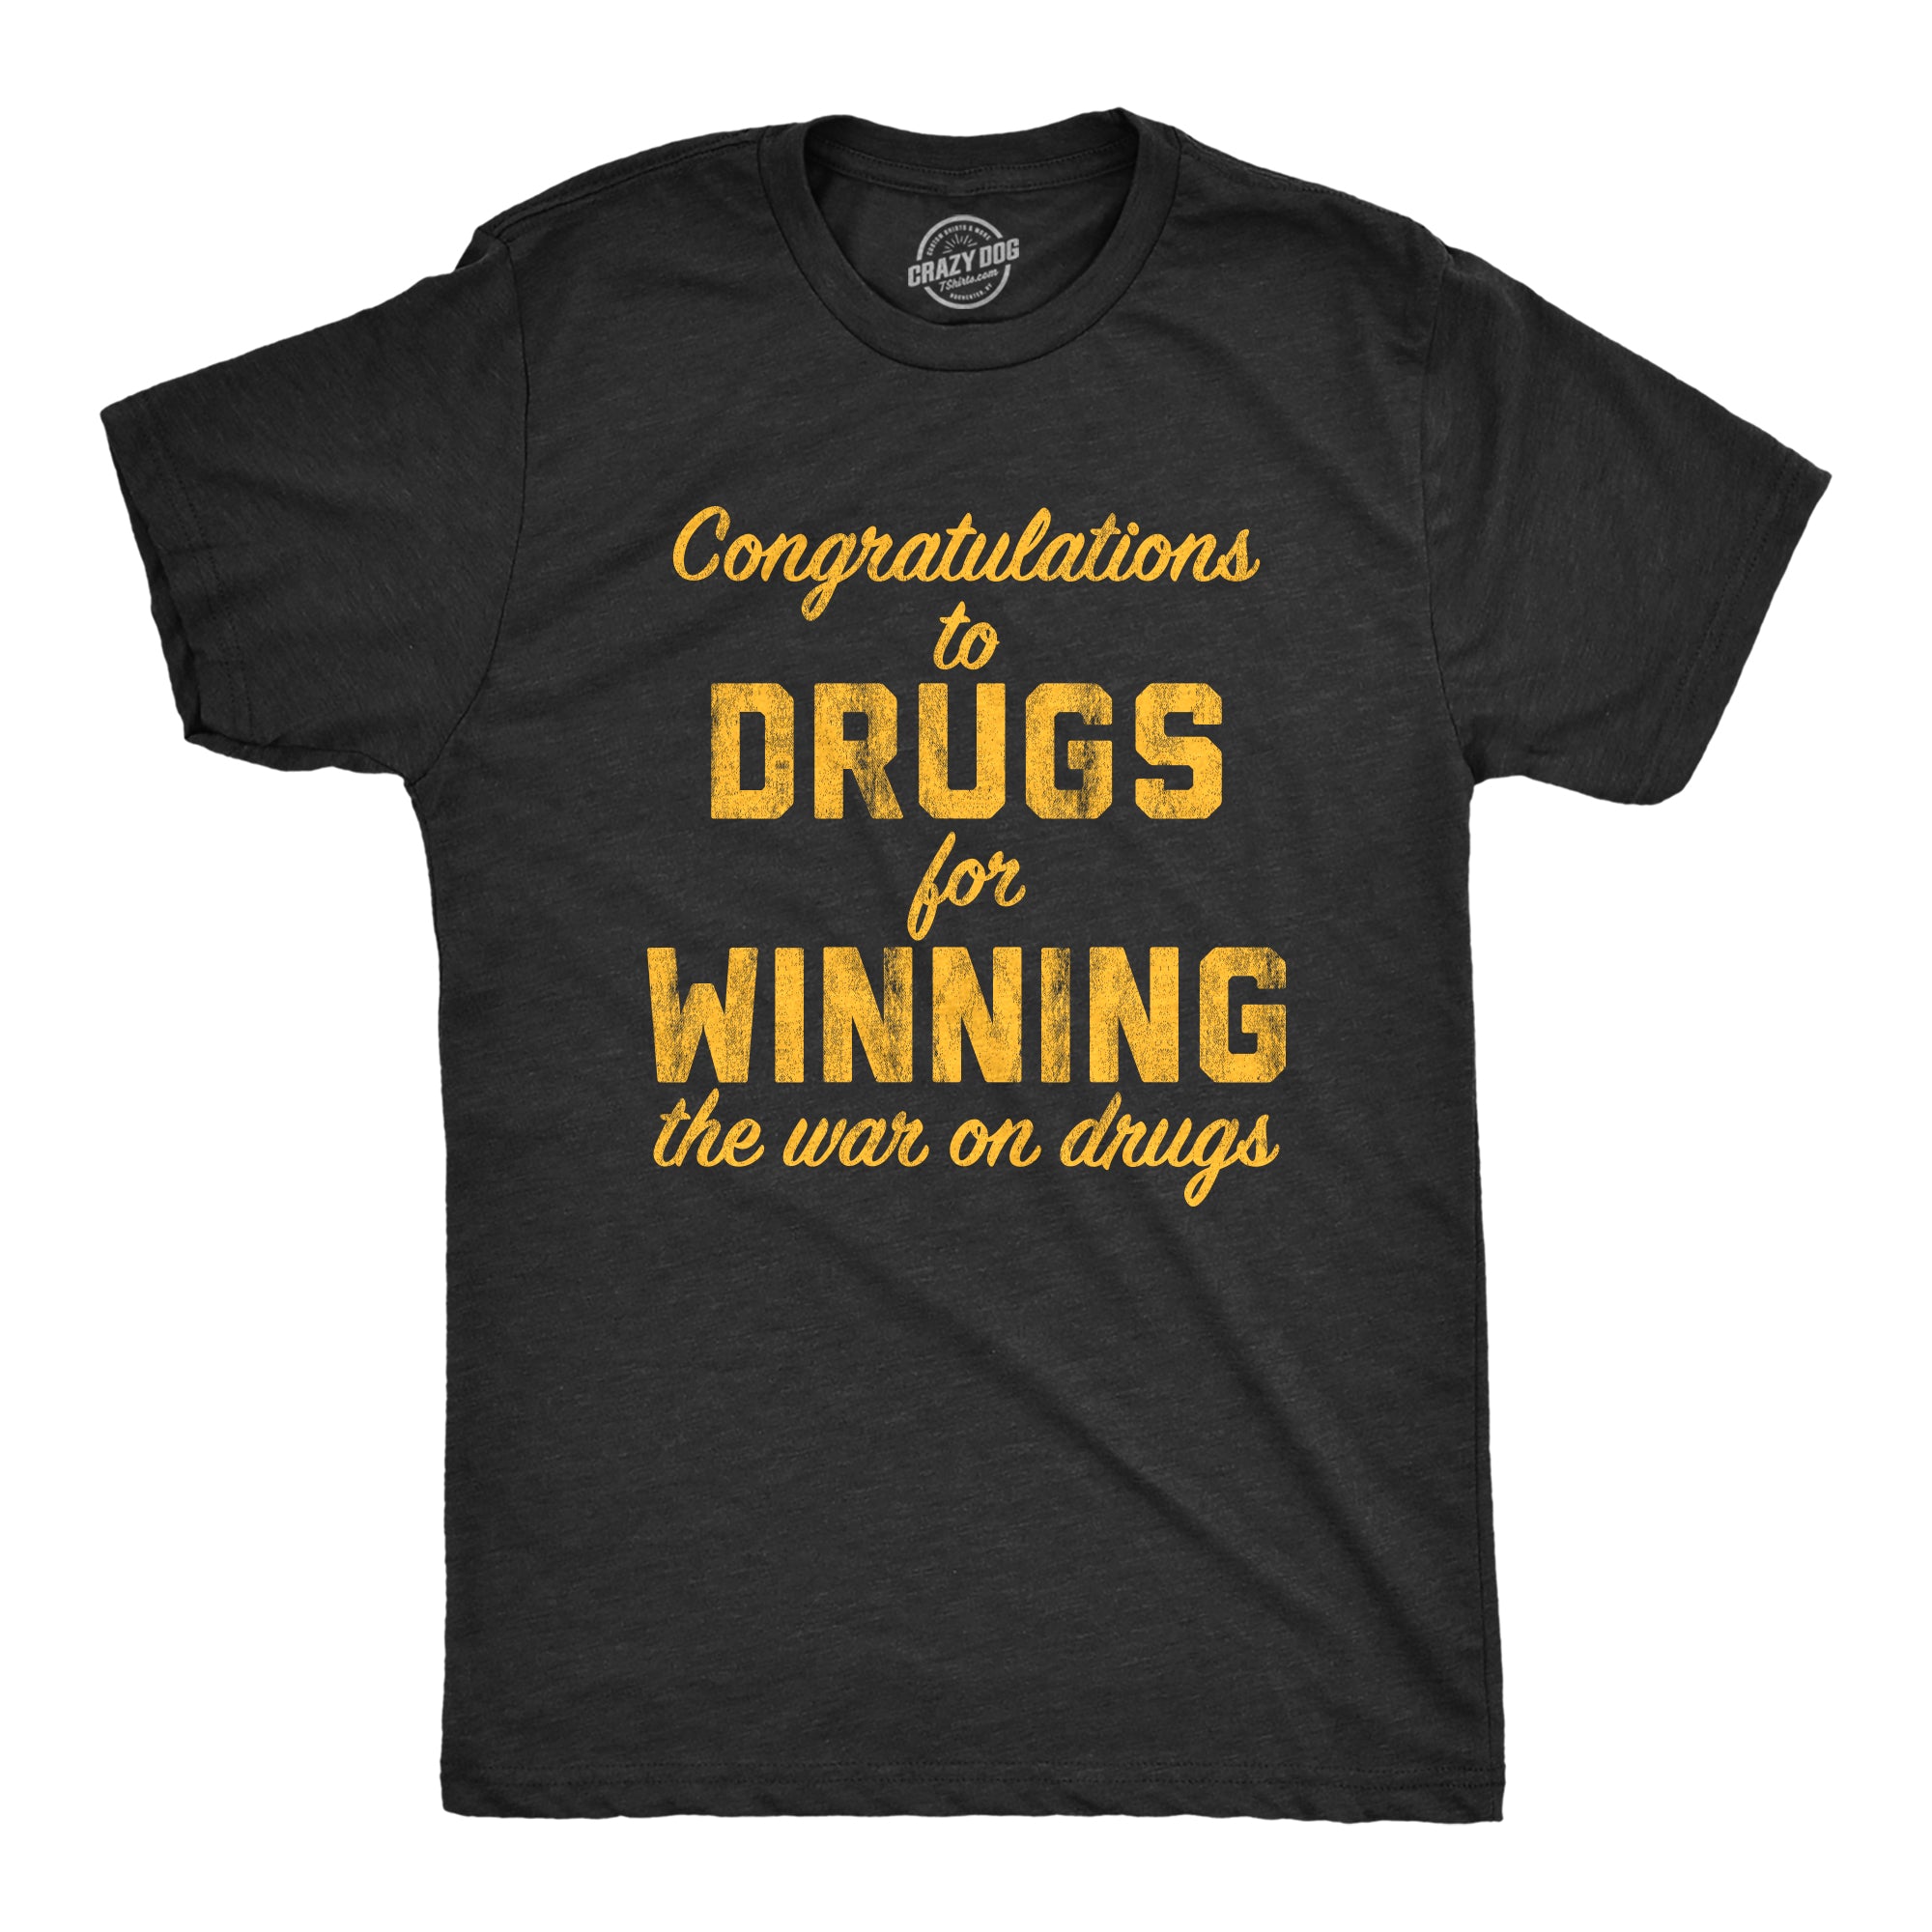 Funny Heather Black Congratulations To The Drugs For Winning The War On Drugs Mens T Shirt Nerdy 420 80s Tee